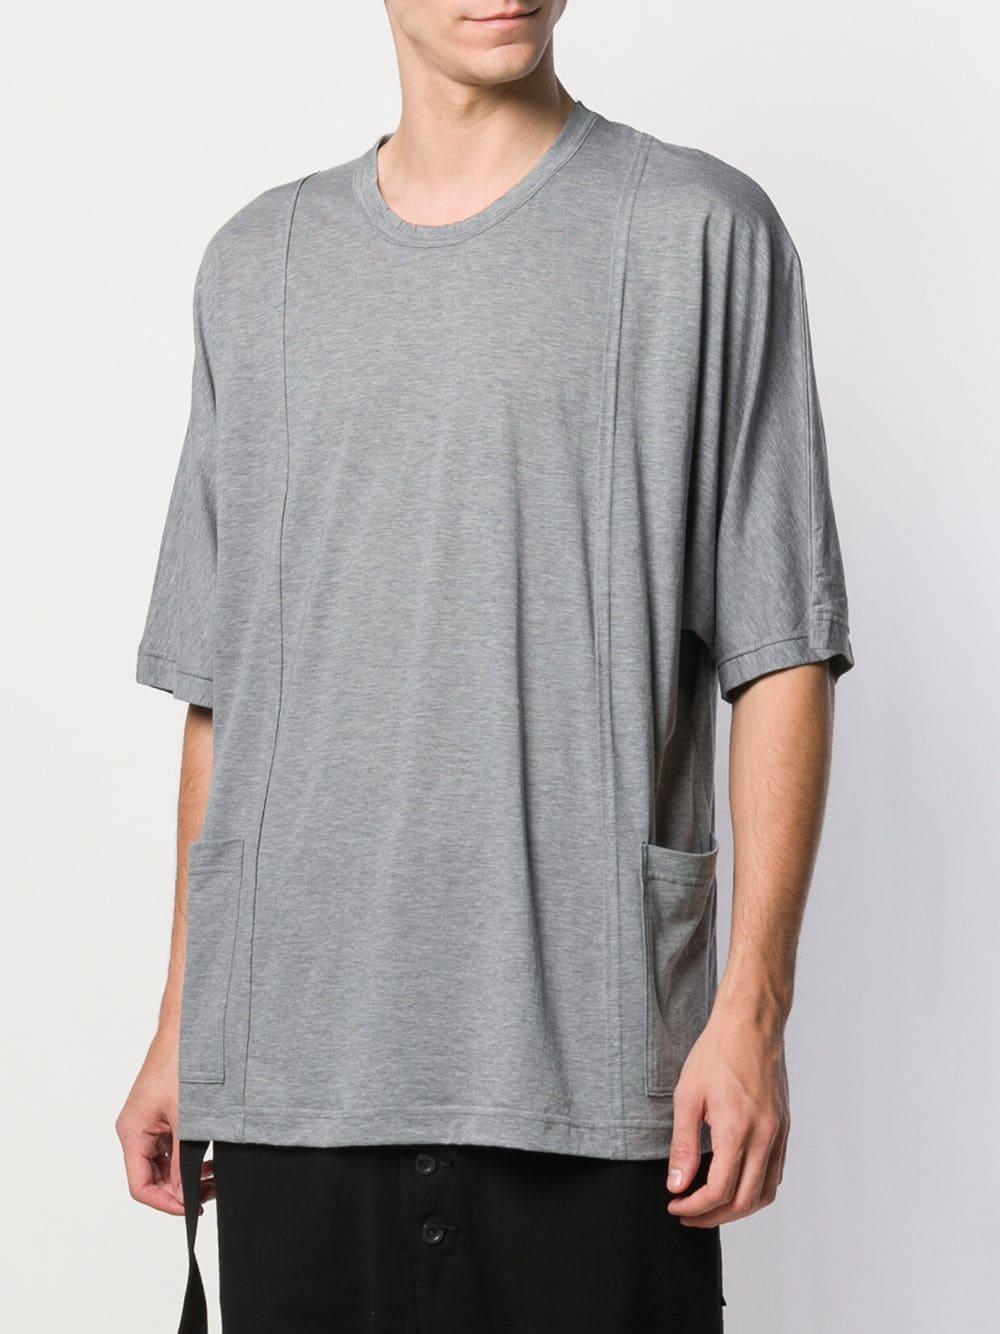 The Viridi-anne Cotton Side Pocket T-shirt in Grey (Gray) for Men - Lyst